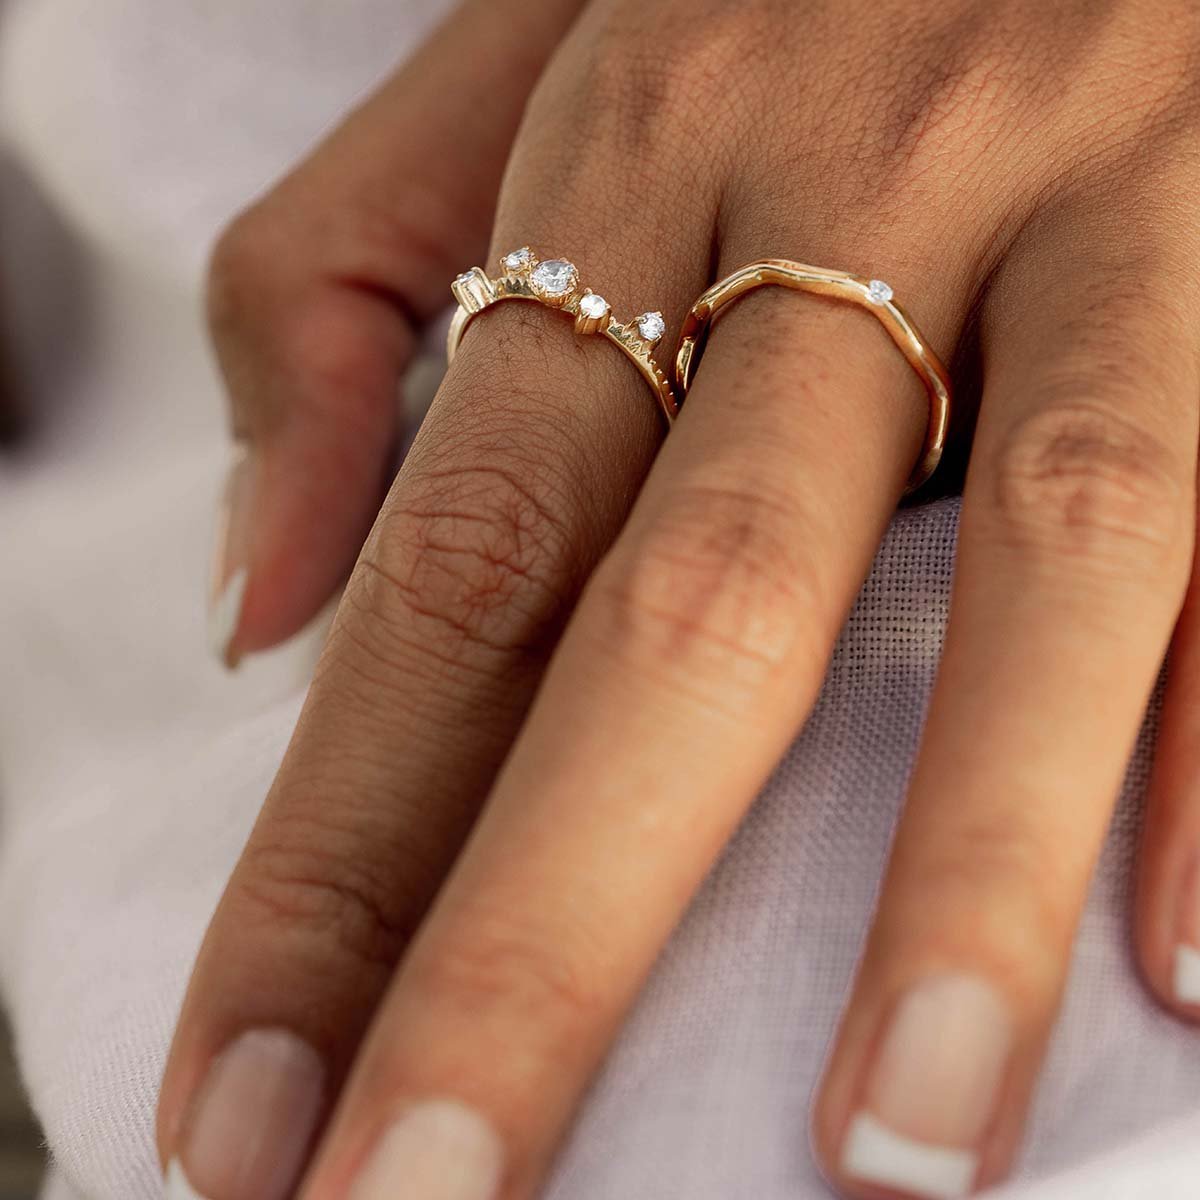 2 Ways to Know Your Ring Size at Home